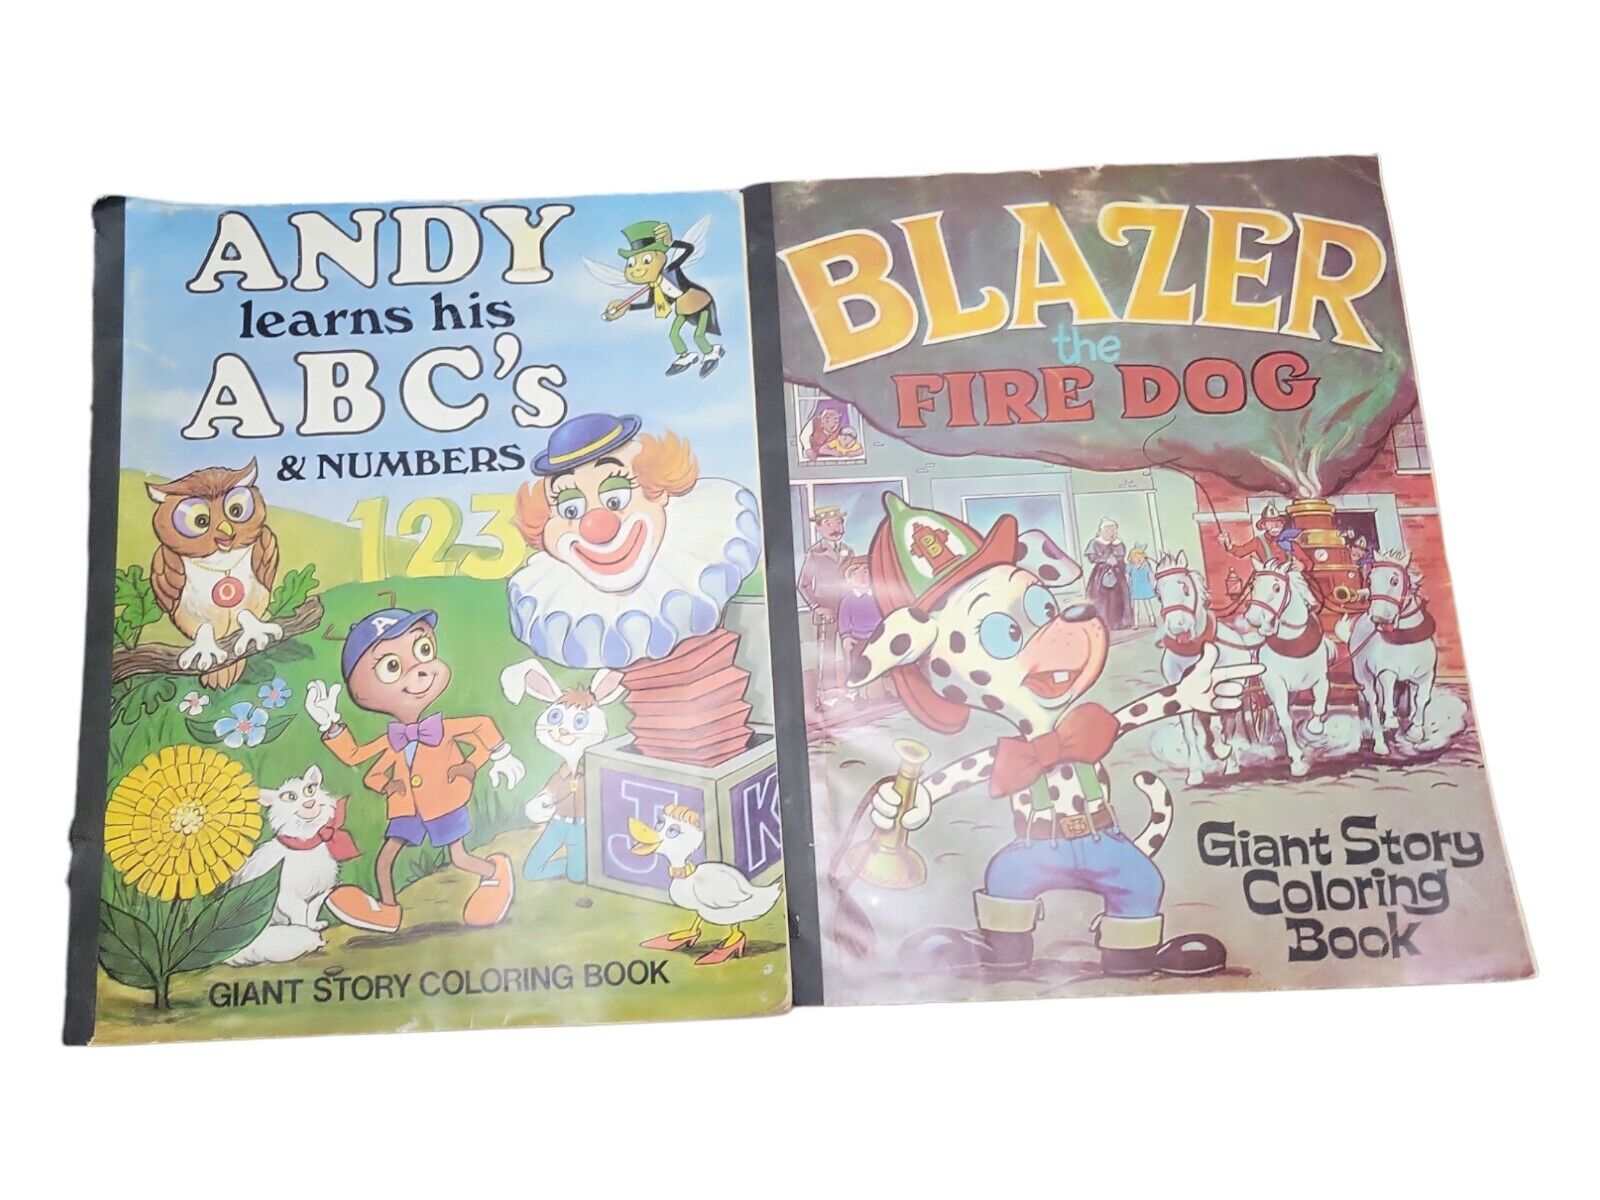 Vintage Giant Coloring Books Blaze Fire Dog And Andy Learns ABCs And Nunbers